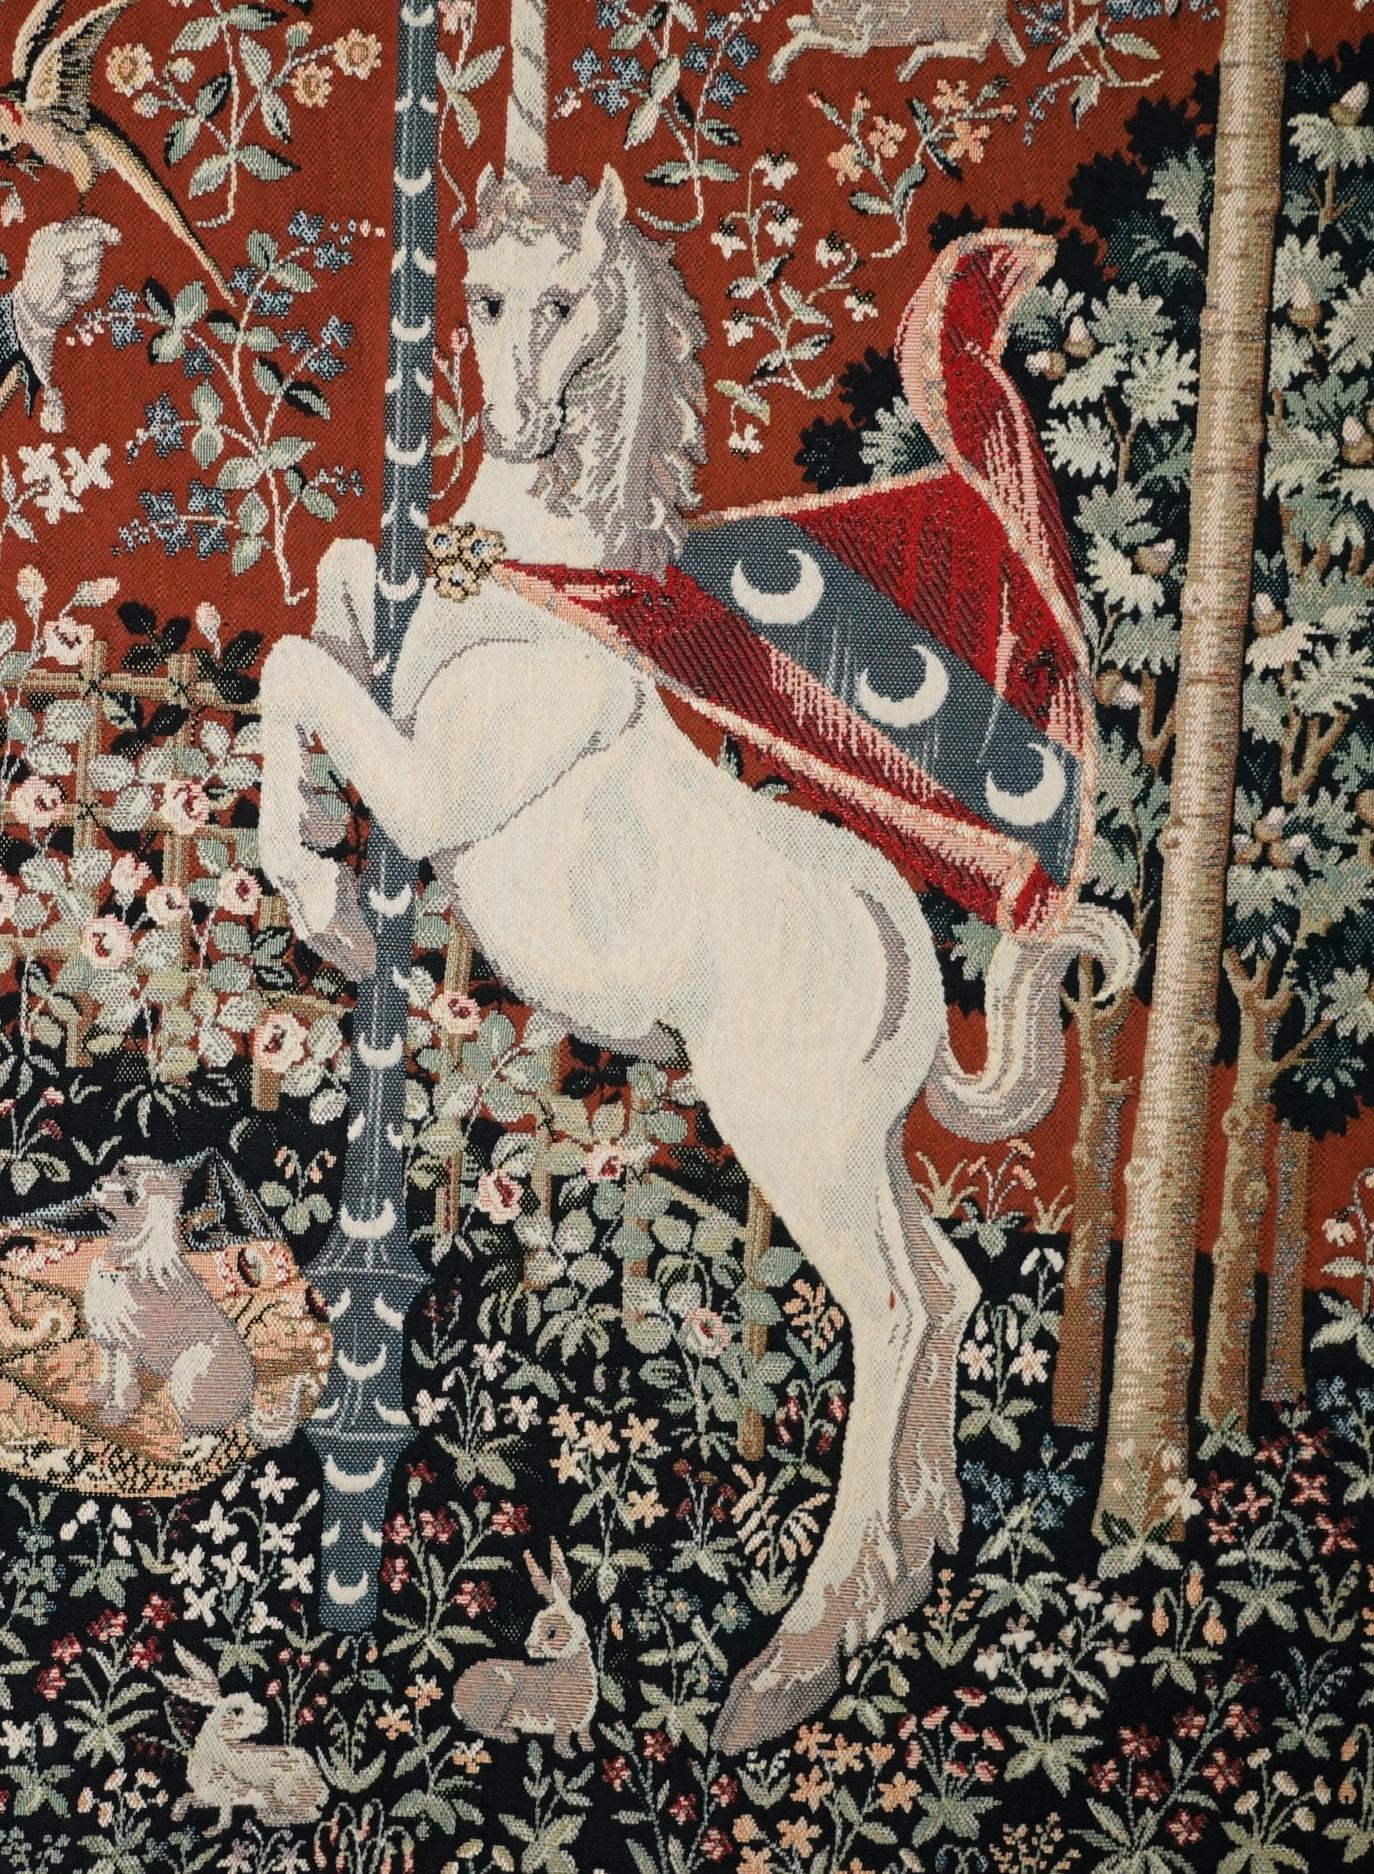 Fabric ViNTAGE THE LADY AND THE UNICORN LARGE WALL HANGING WOVEN TAPESTRY 216CM X 189CM For Sale